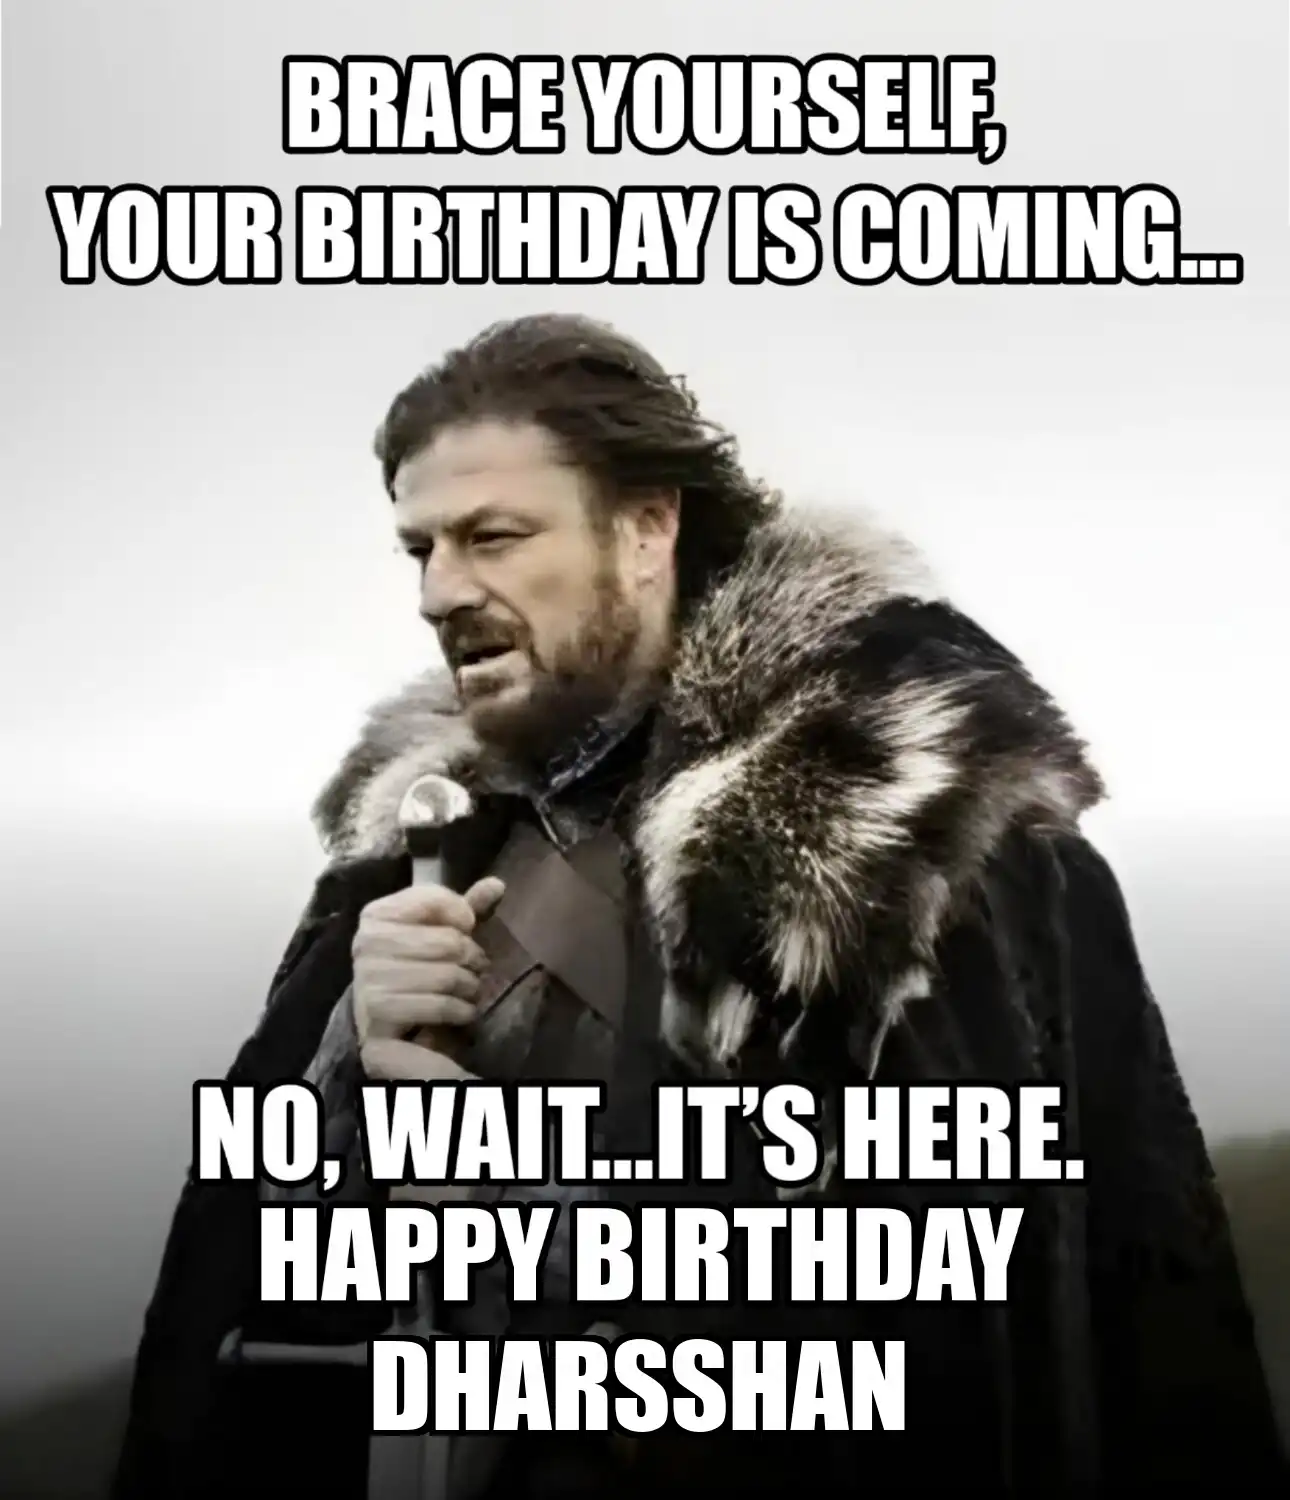 Happy Birthday Dharsshan Brace Yourself Your Birthday Is Coming Meme